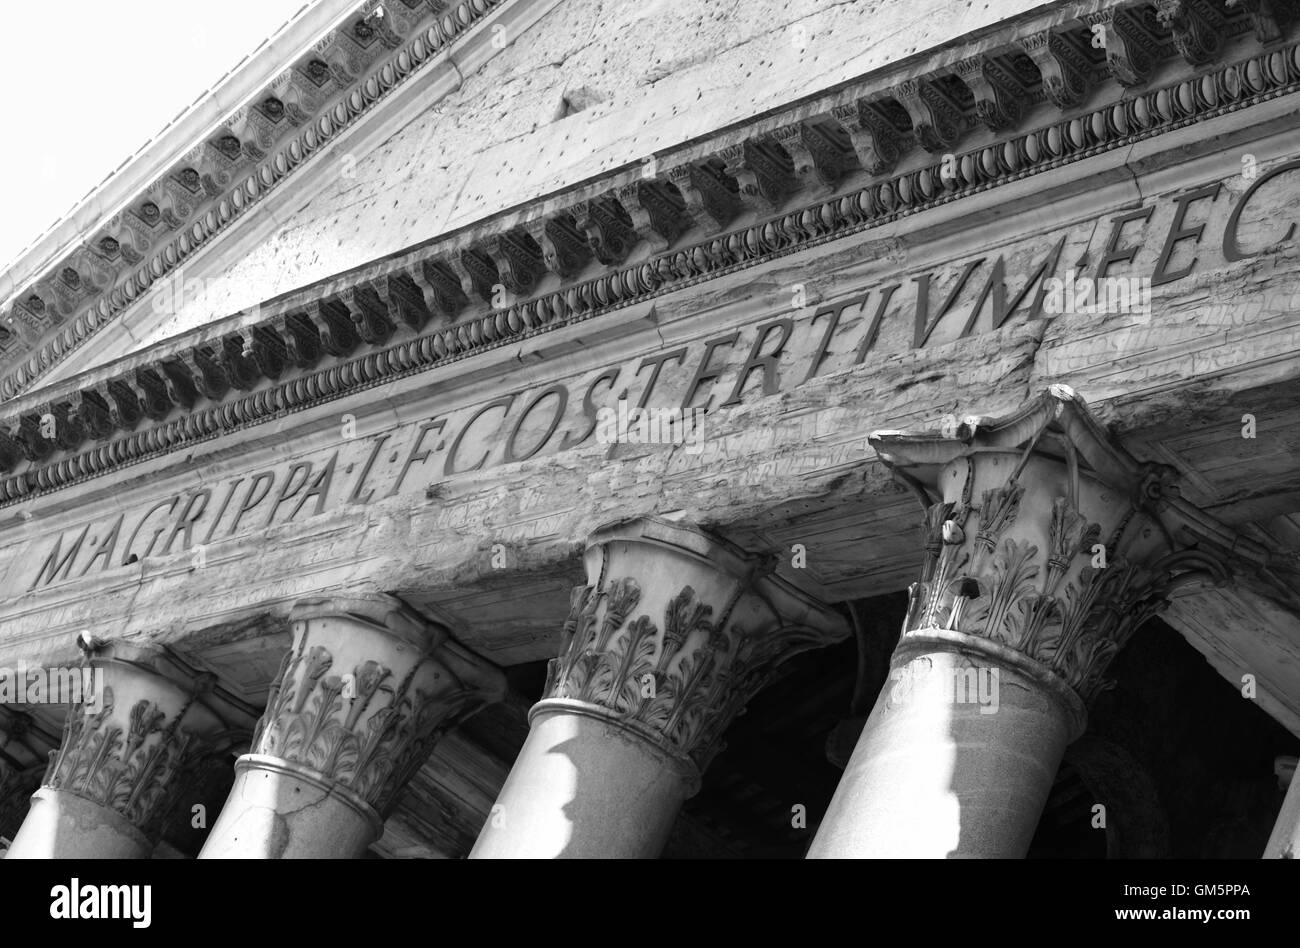 Detail of the facade of Pantheon in Rome, Italy Stock Photo